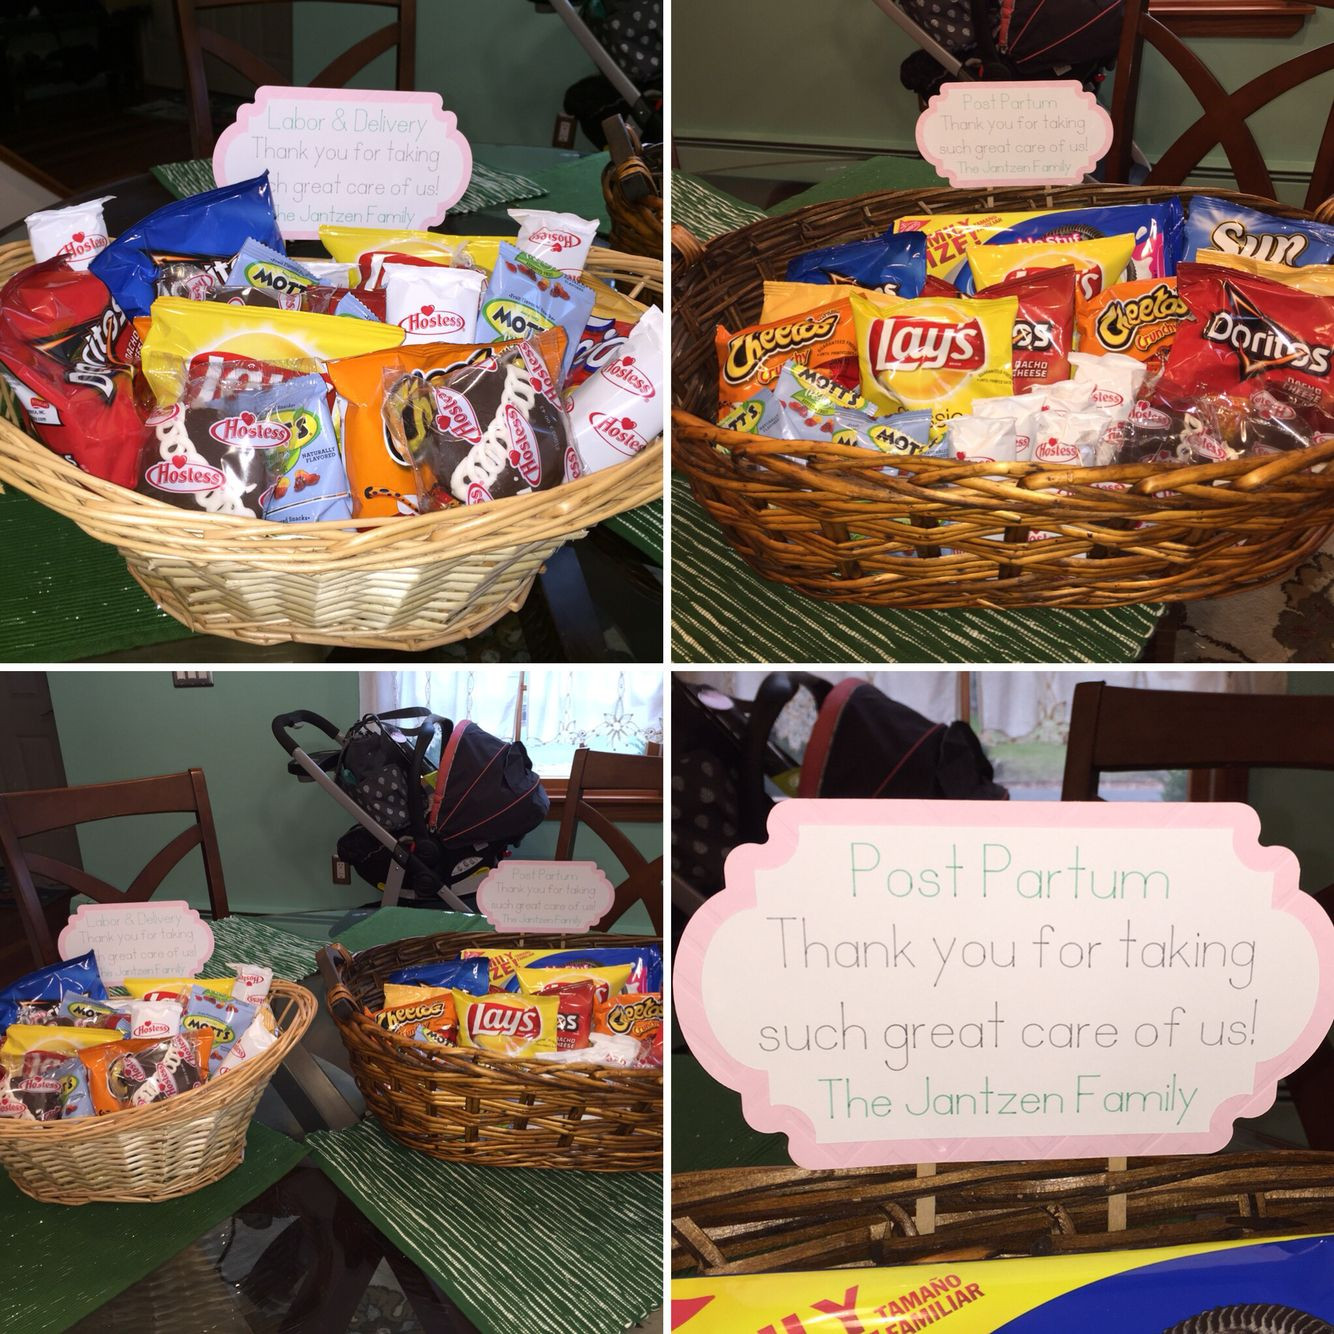 Thank You Gift Delivery Ideas
 Thank you basket for nurses and staff labor and delivery